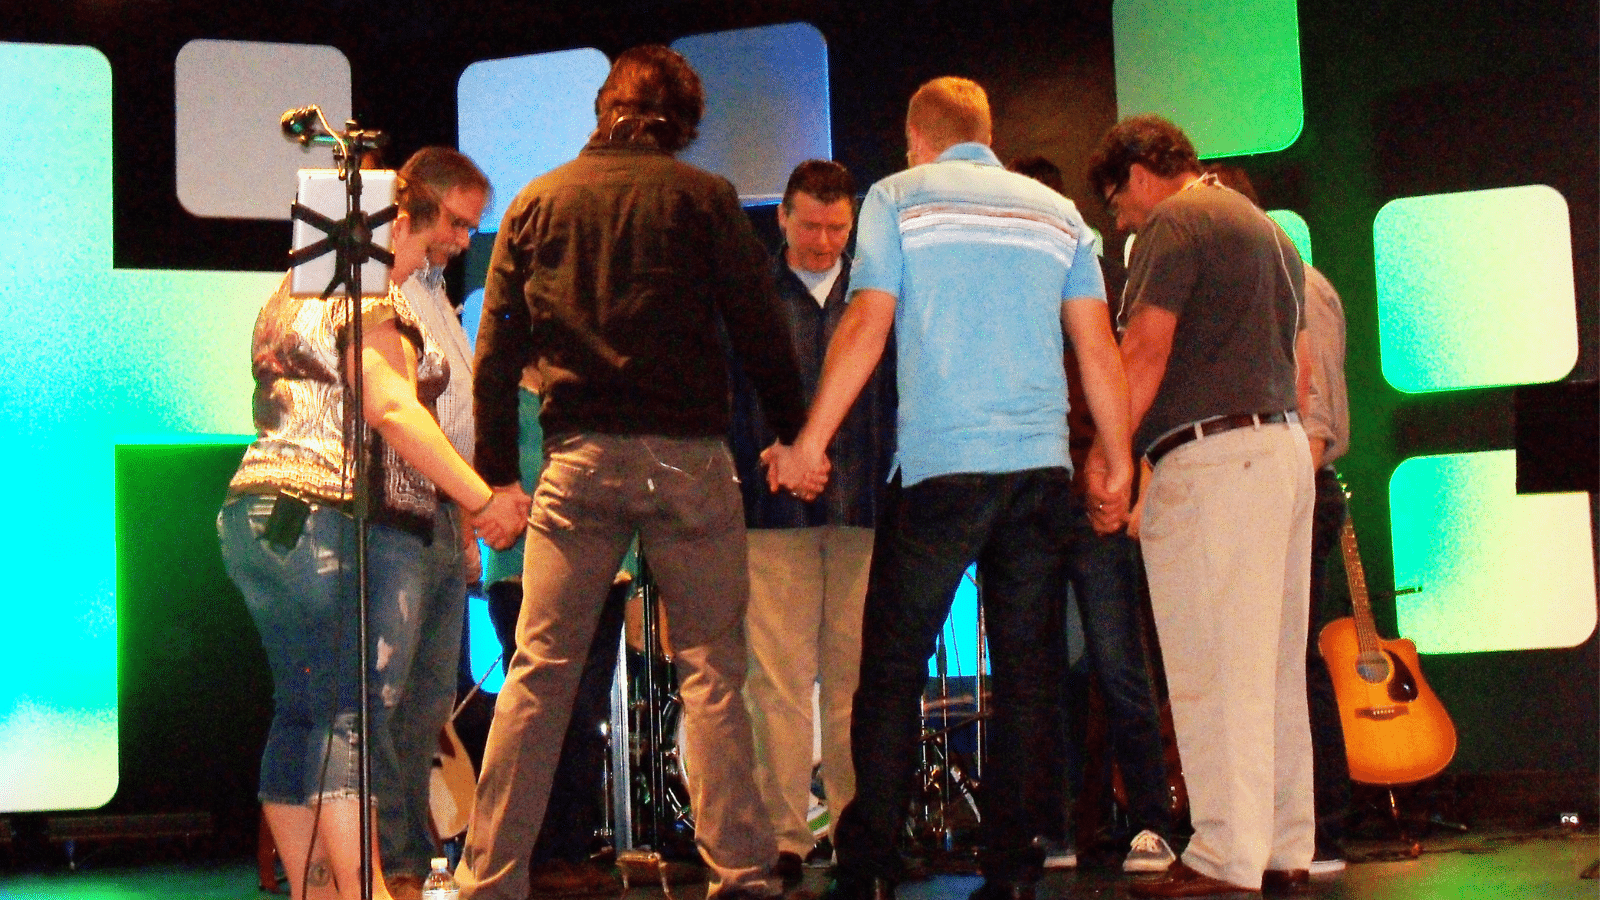 A group of Men and Women gathered together, holding hands in a circle, praying.